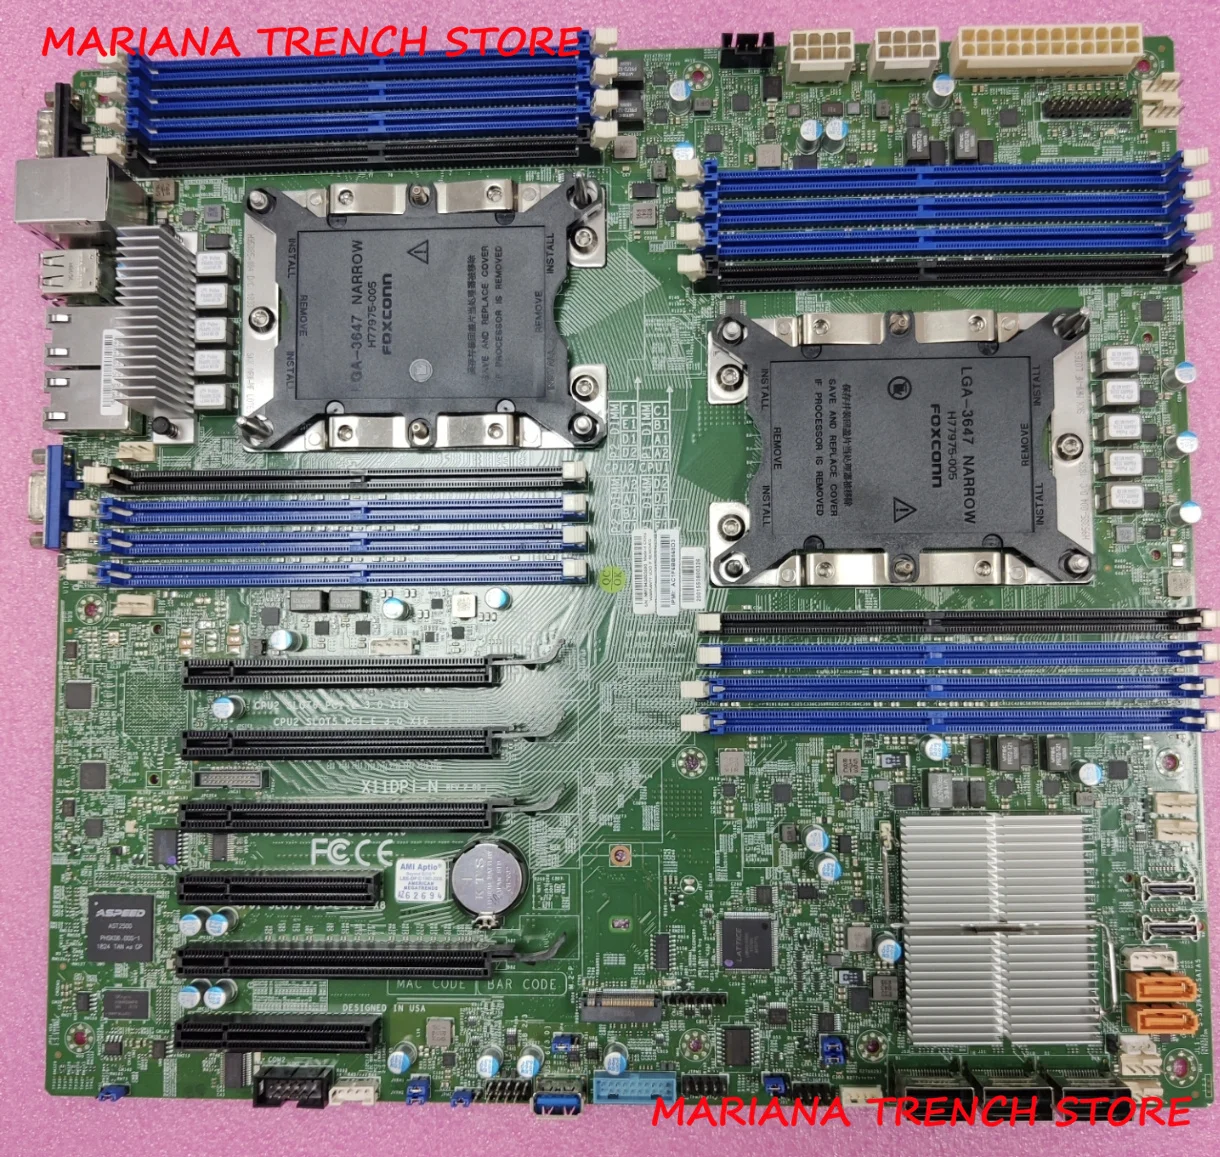 

X11DPi-N for Supermicro Motherboard Xeon Scalable Processors LGA-3647 DDR4 2 PCI-E 3.0 NVMe x4 Internal Ports